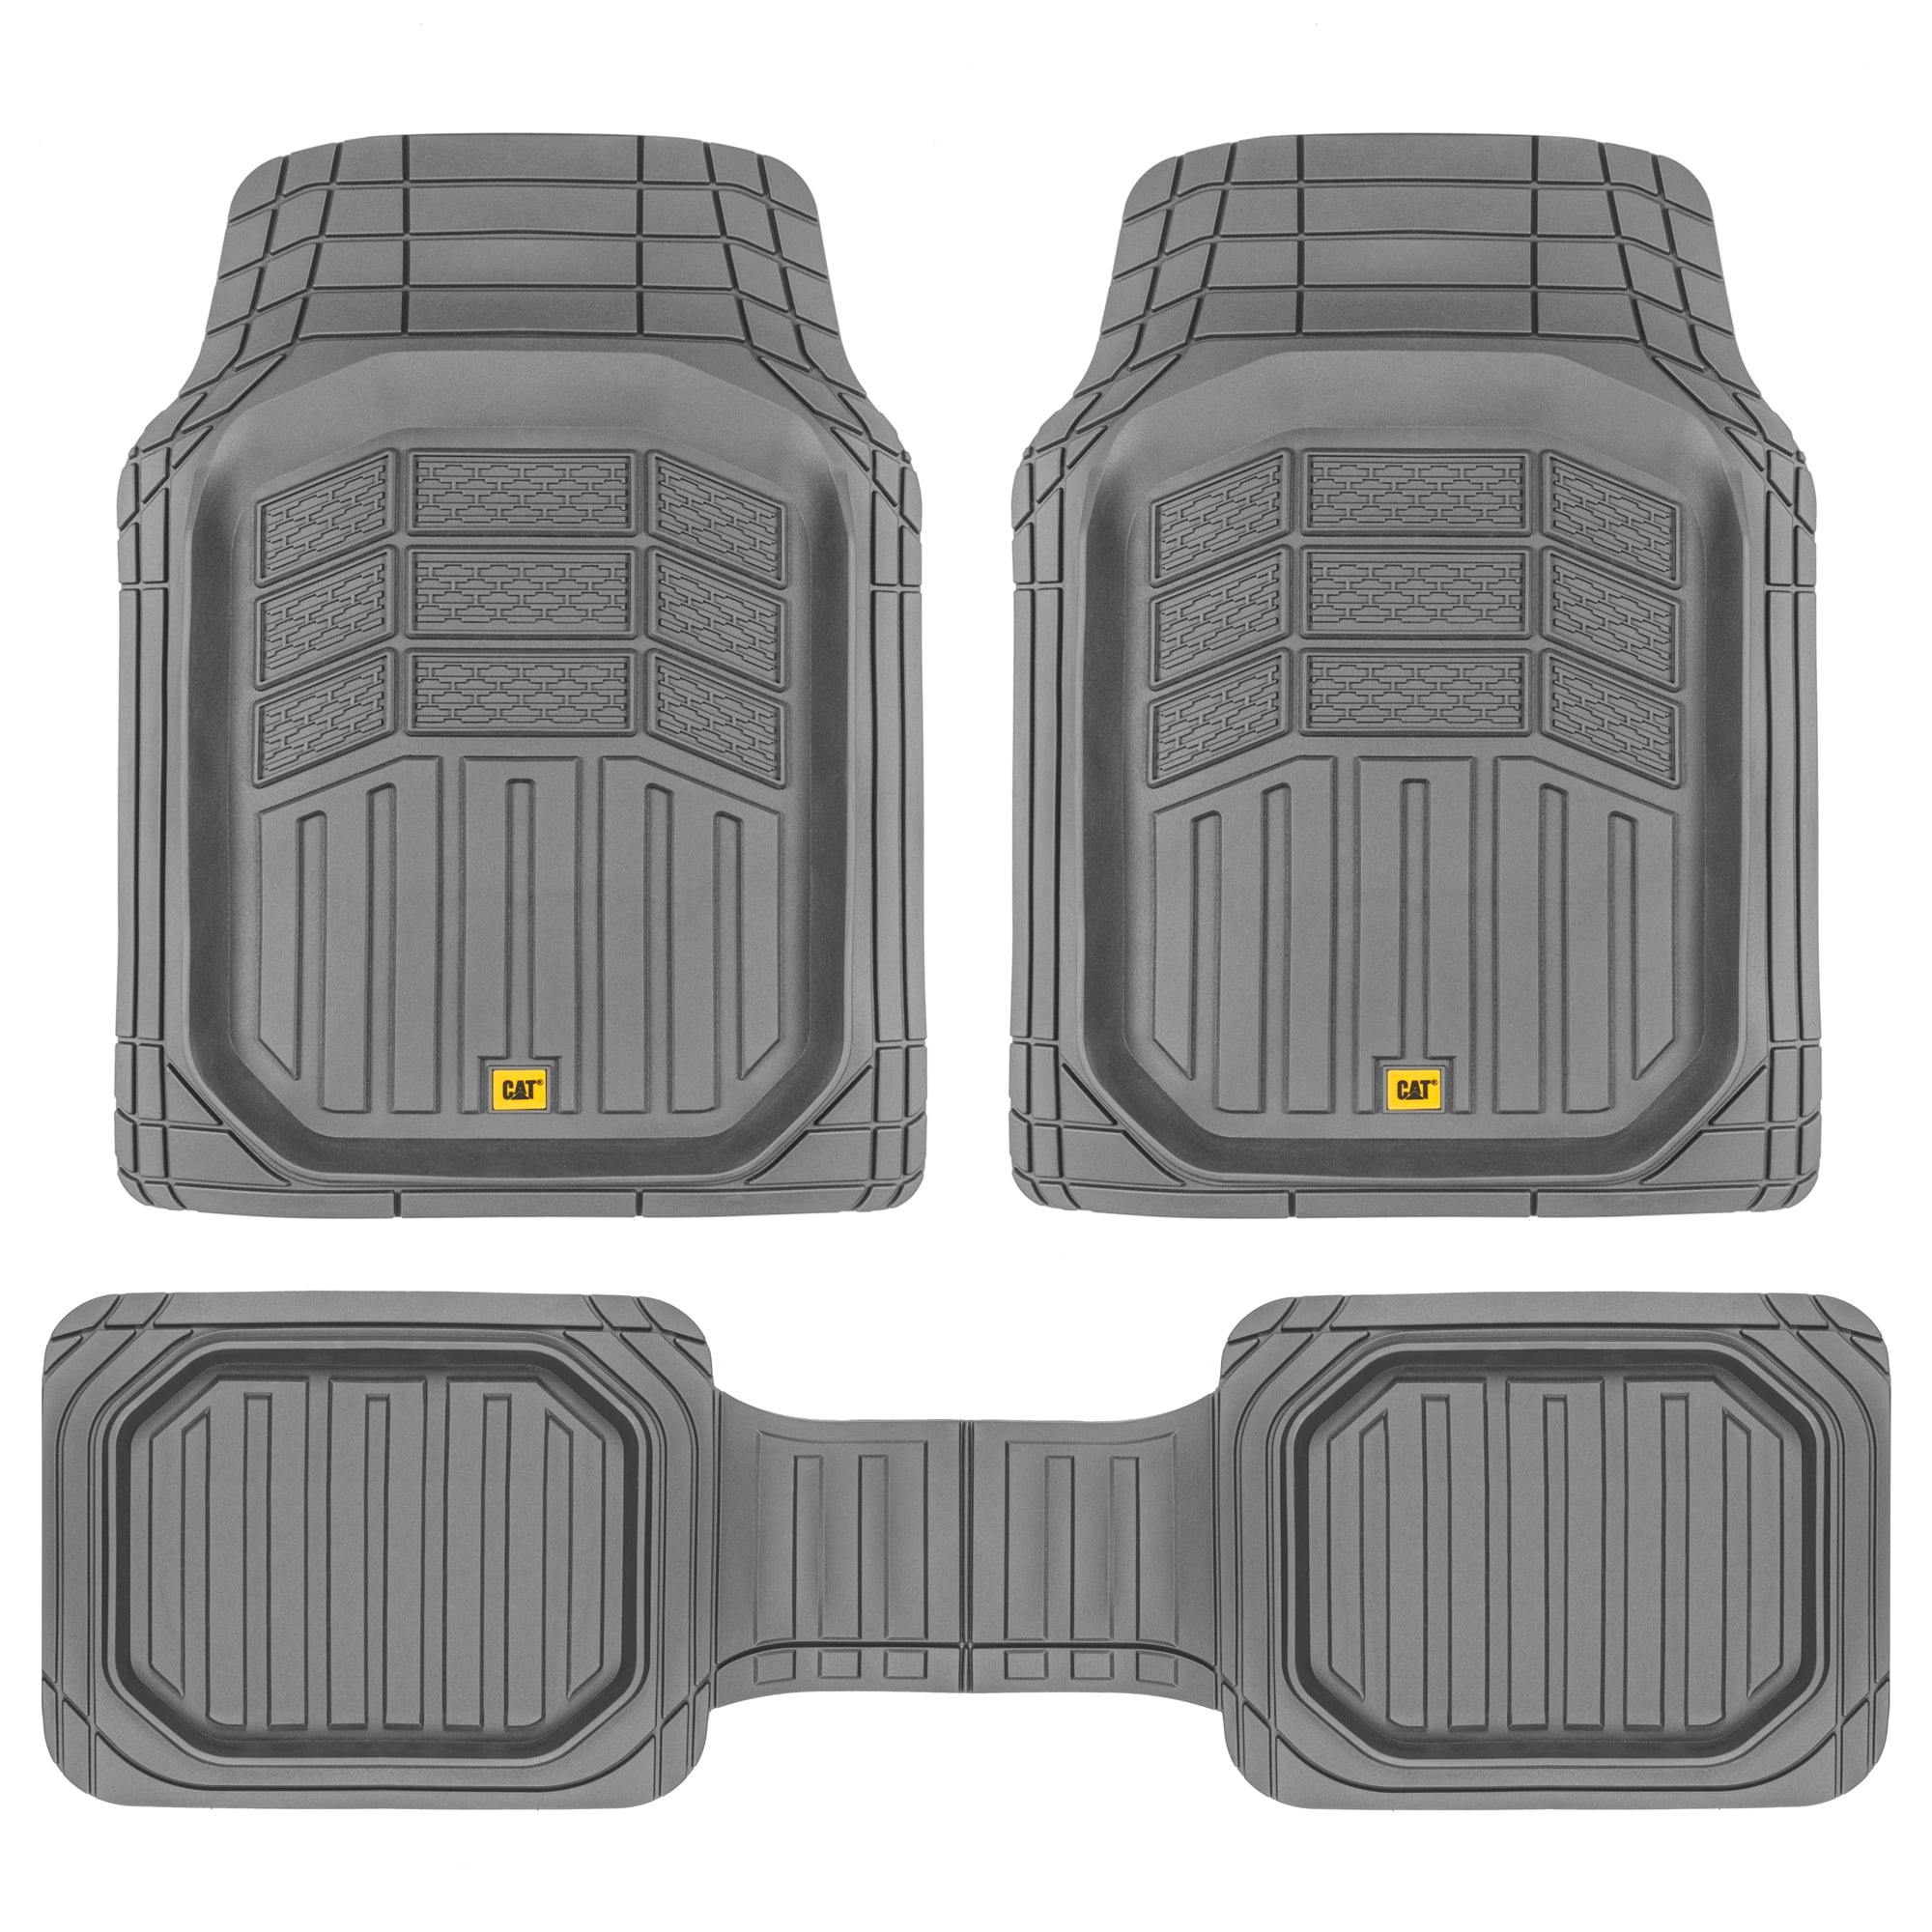 Large Deep Dish Rubber Car Floor Mats with Trunk Cargo Liner Universal Trim to Fit Front & Rear Combo Set for Car Sedan SUV Van BDK Caterpillar CAMT-9013 3-Piece Heavy Duty All Weather 